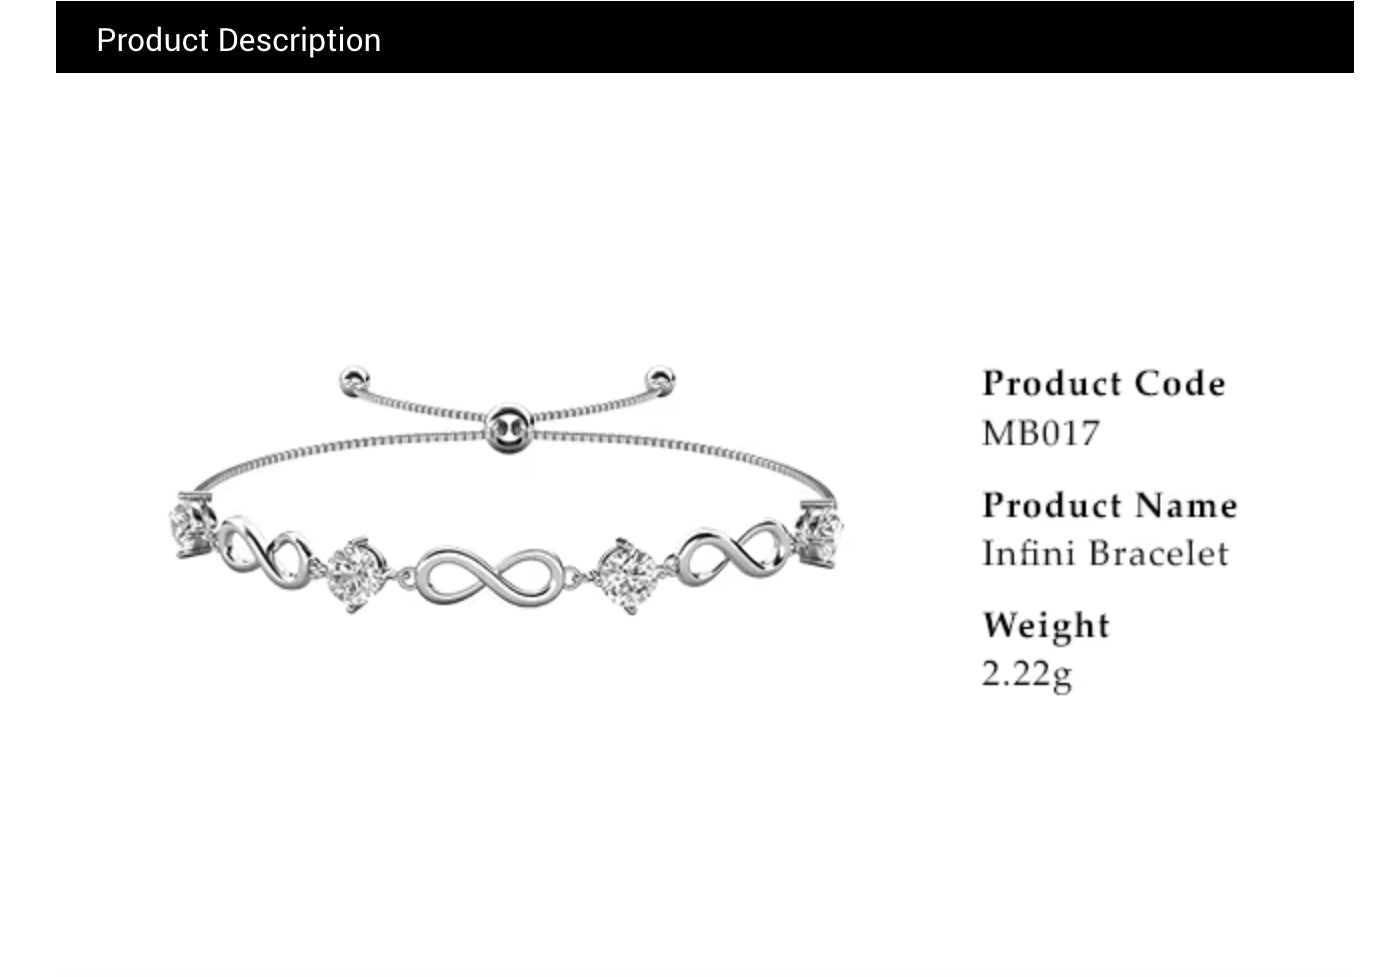 Infinity bracelet in your choice of colors